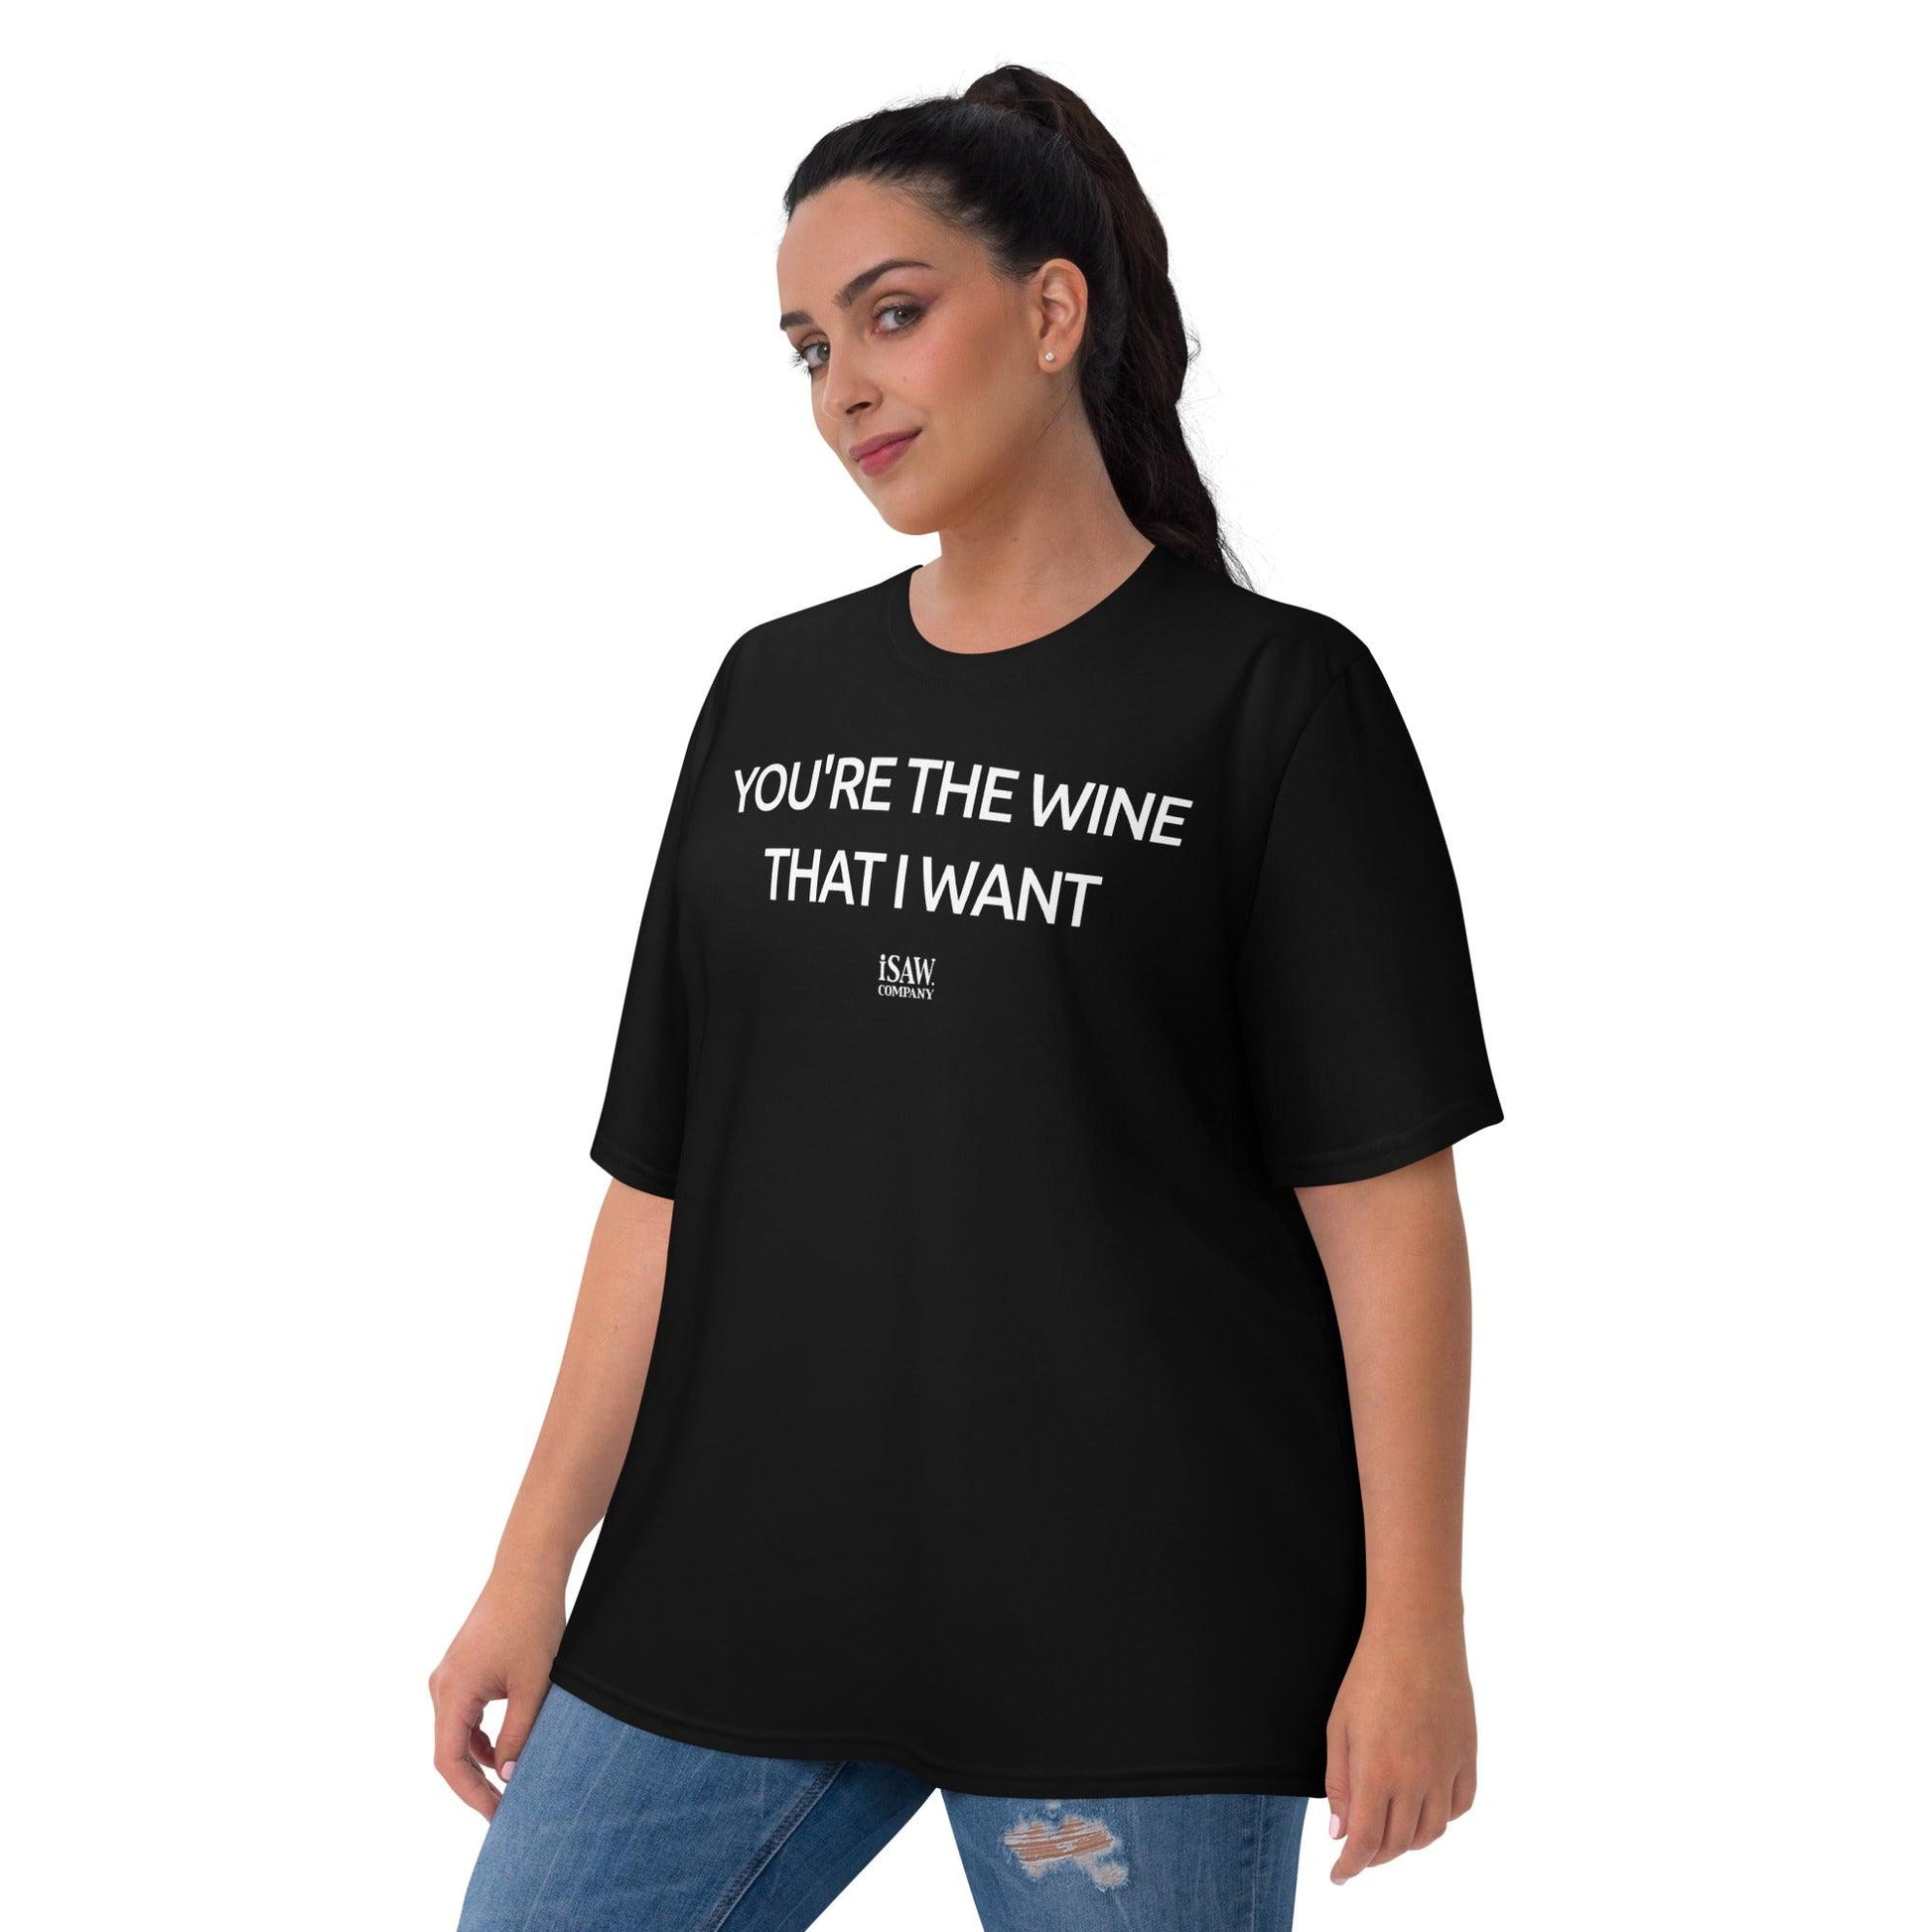 You’re The Wine That I Want - Womens Black T-Shirt - iSAW Company